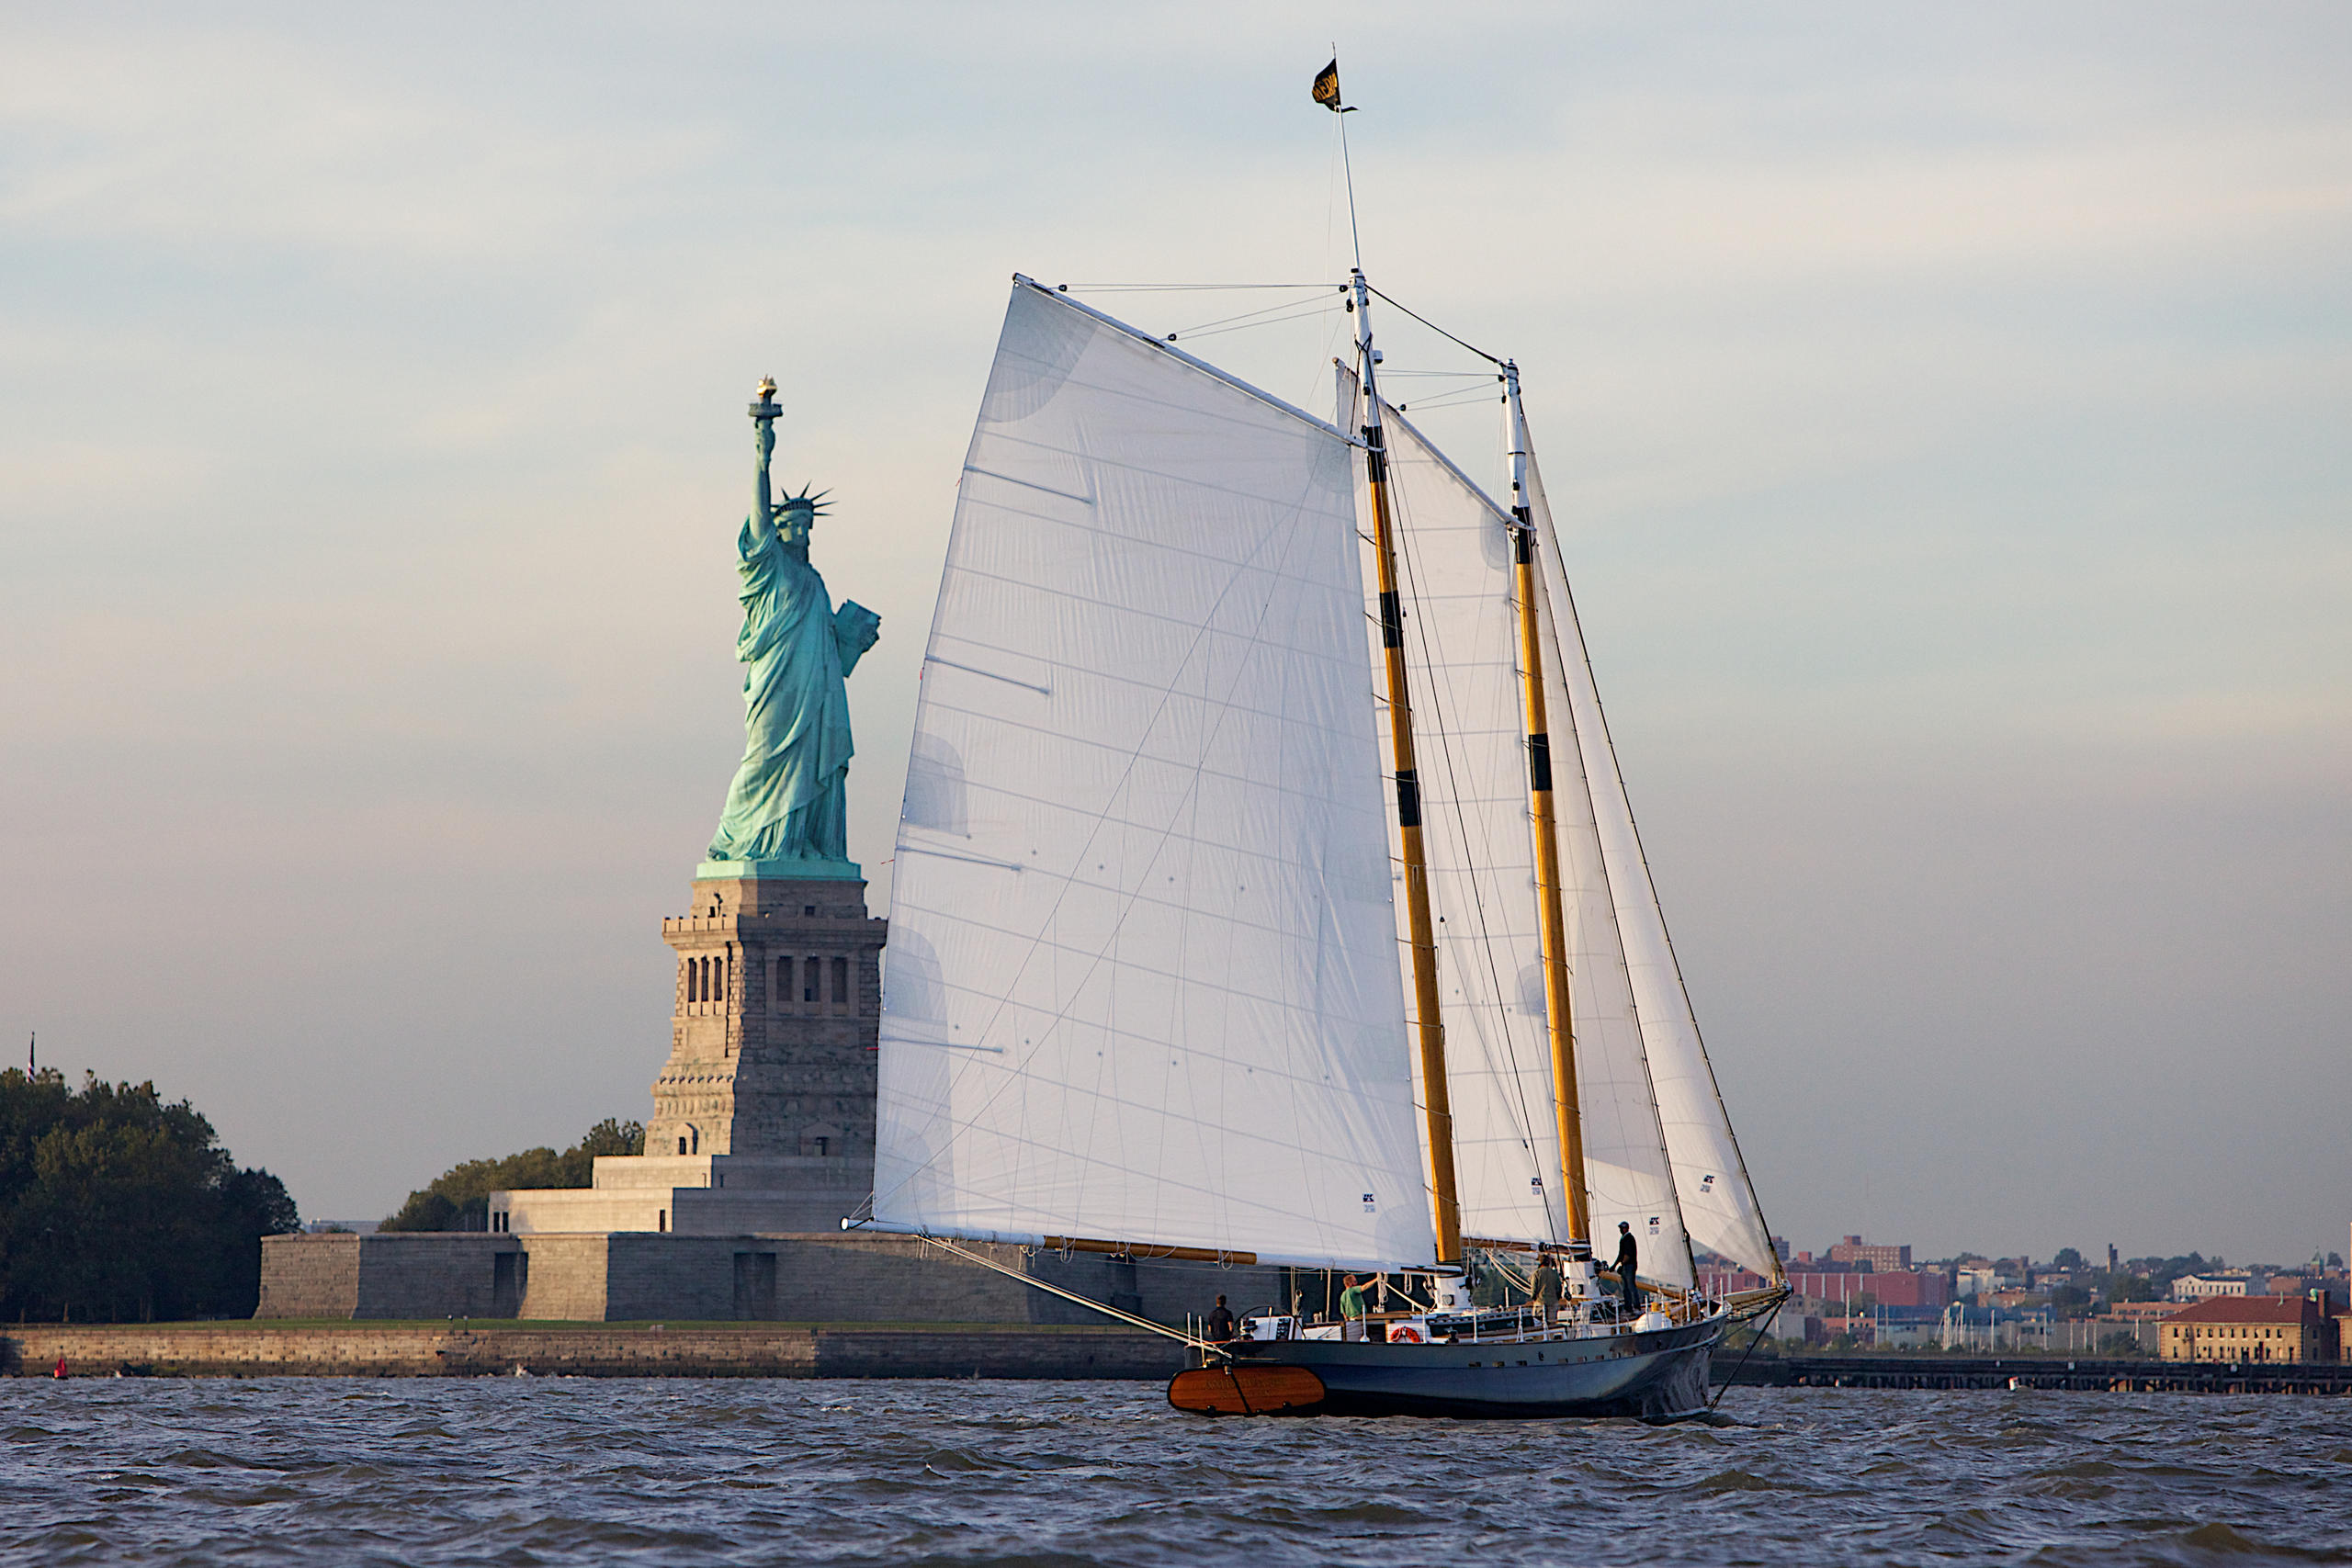 Full-day Sailing to the Statue of Liberty 